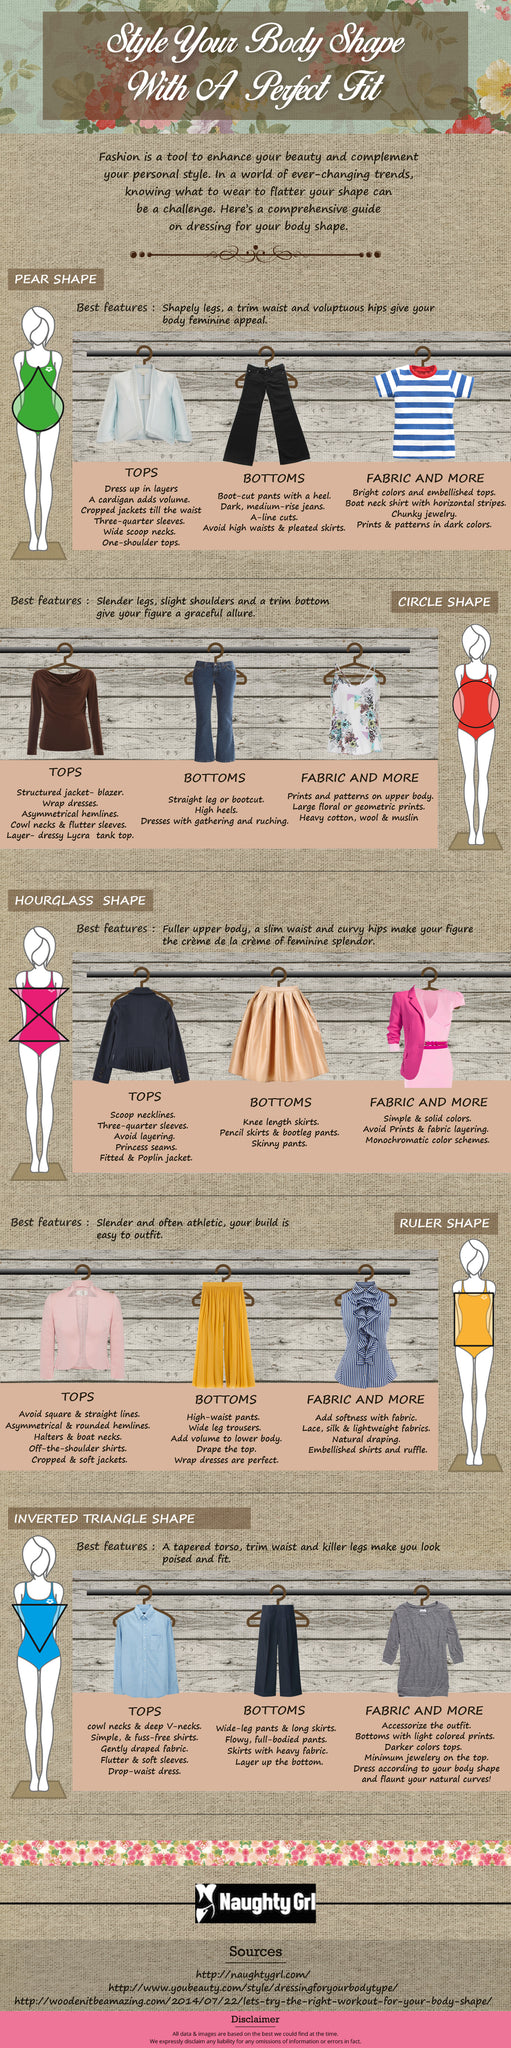 Naughty Grl - The Style Guide For Body Shapes Infographic